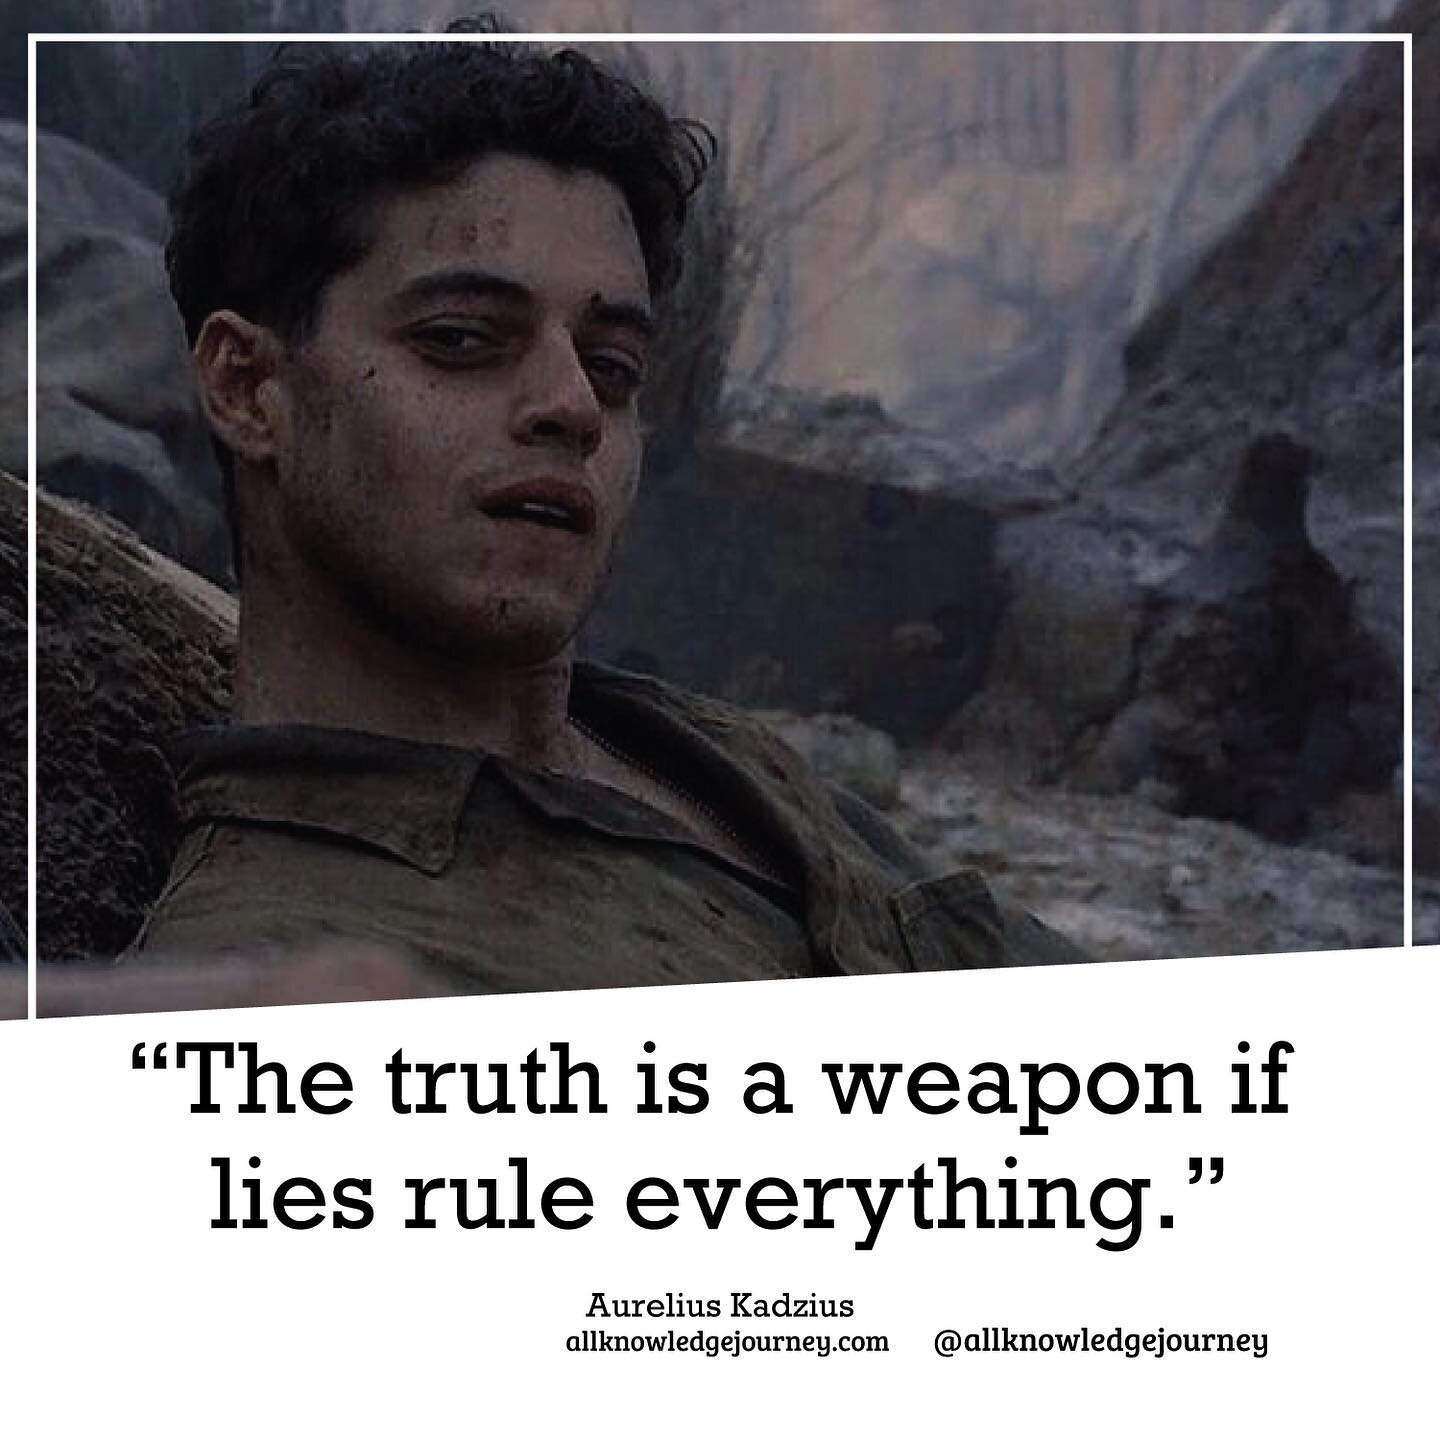 The truth is a weapon if lies rule everything around a man.

Aurelius Kadzius

Truth becomes a way to live for men looking for something real. It may be why a man desires to wake up and face the day again. To meet the truth about our actions, mistake